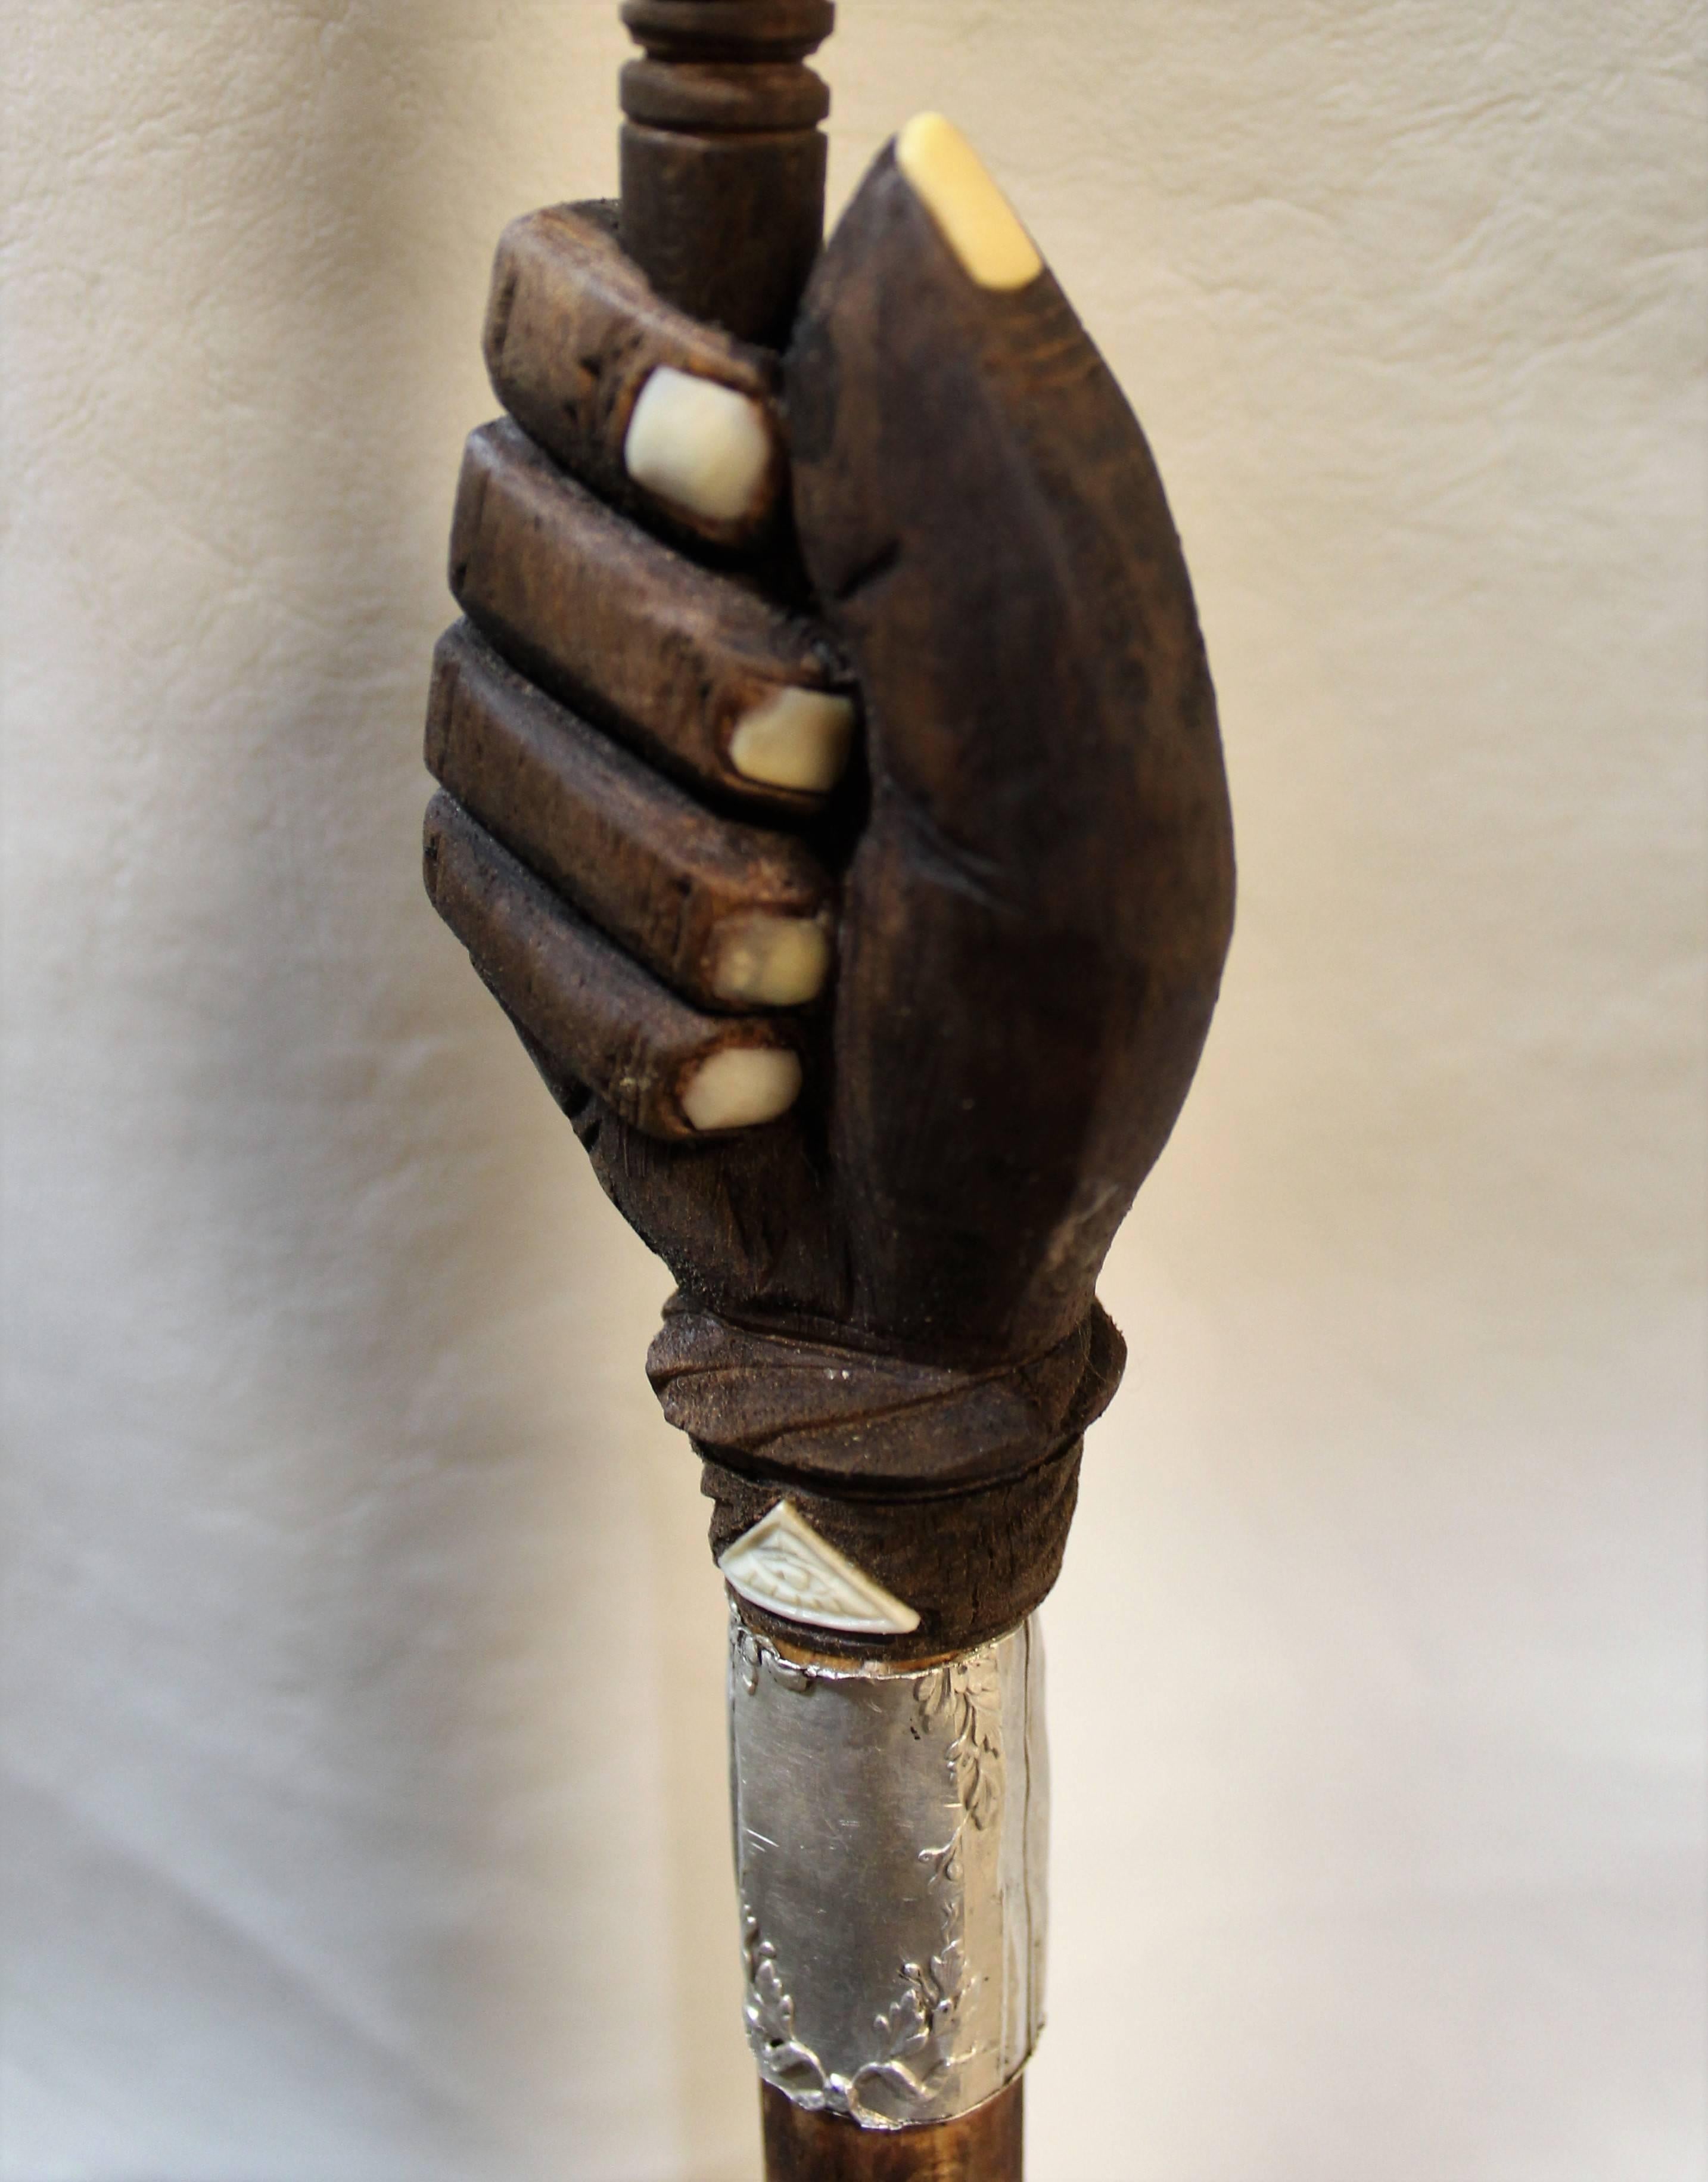 19th century German masons cane or walking stick made of wood, silver and bone. The handle is a gavel which detaches from the rest of the cane.